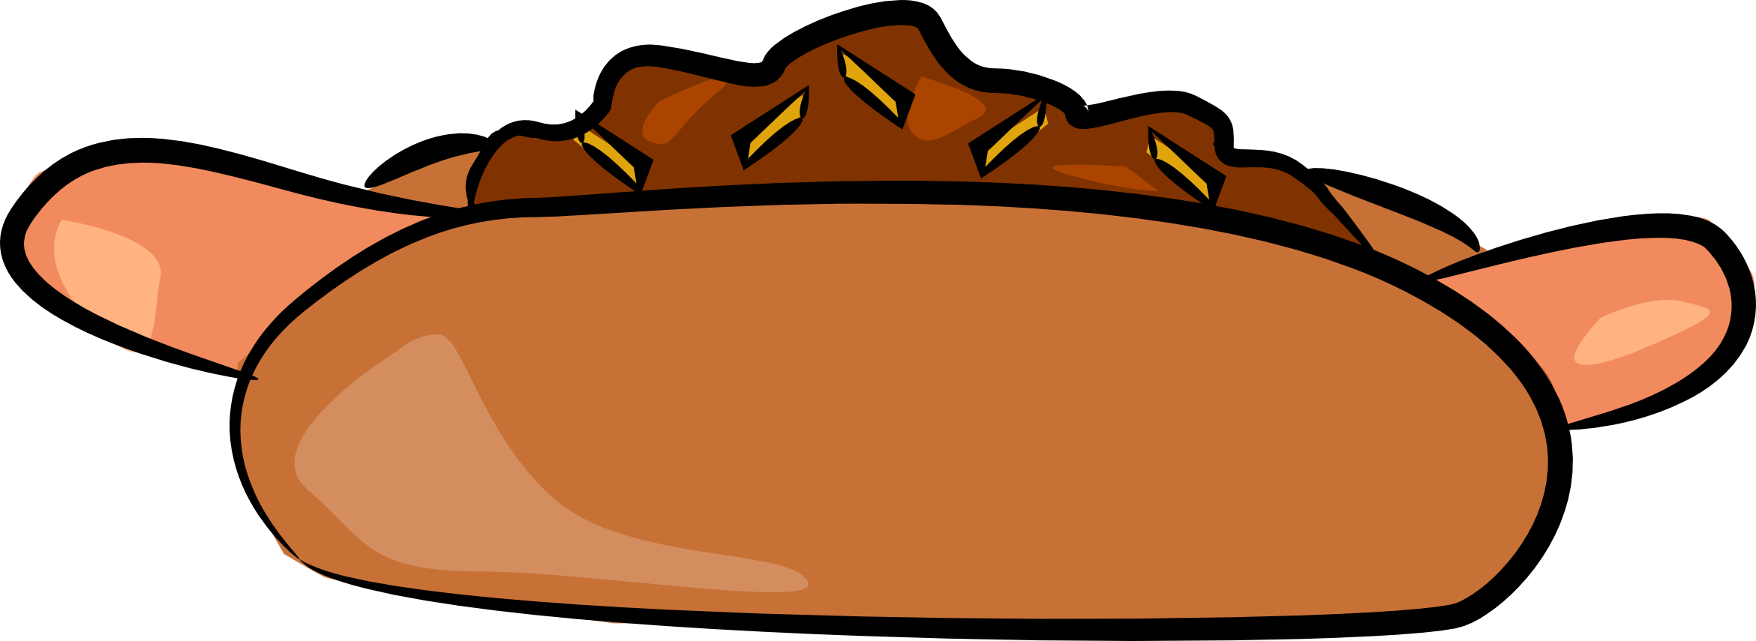 cup clipart chili